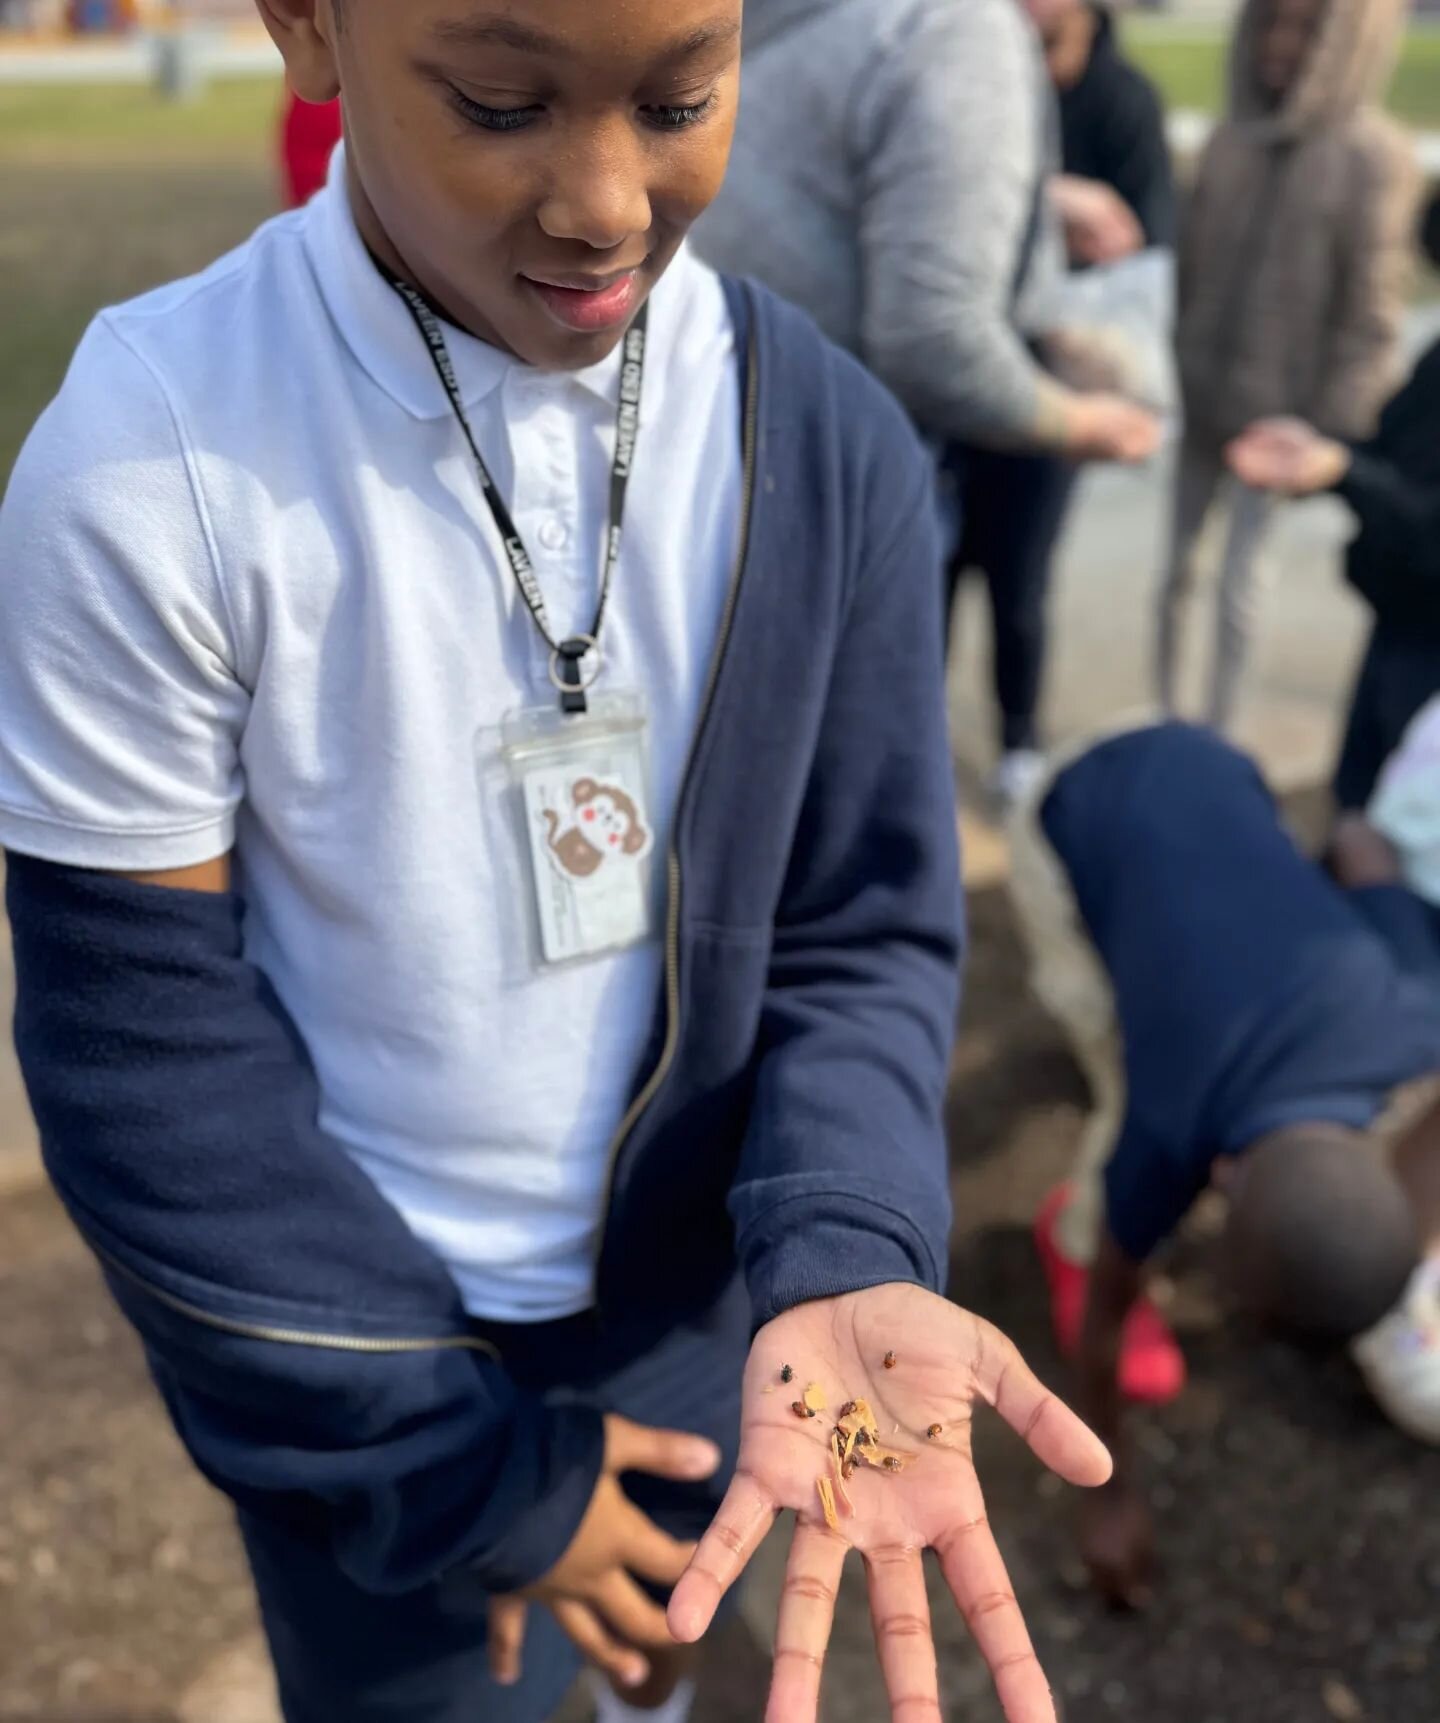 In celebration of spring, learners at Cheatham Elementary @cheatham_school and staff @laveenchildnutrition were welcomed back to school with the grand opening of their new garden space! The event wasn't complete without a lady-bug release and a Chef 